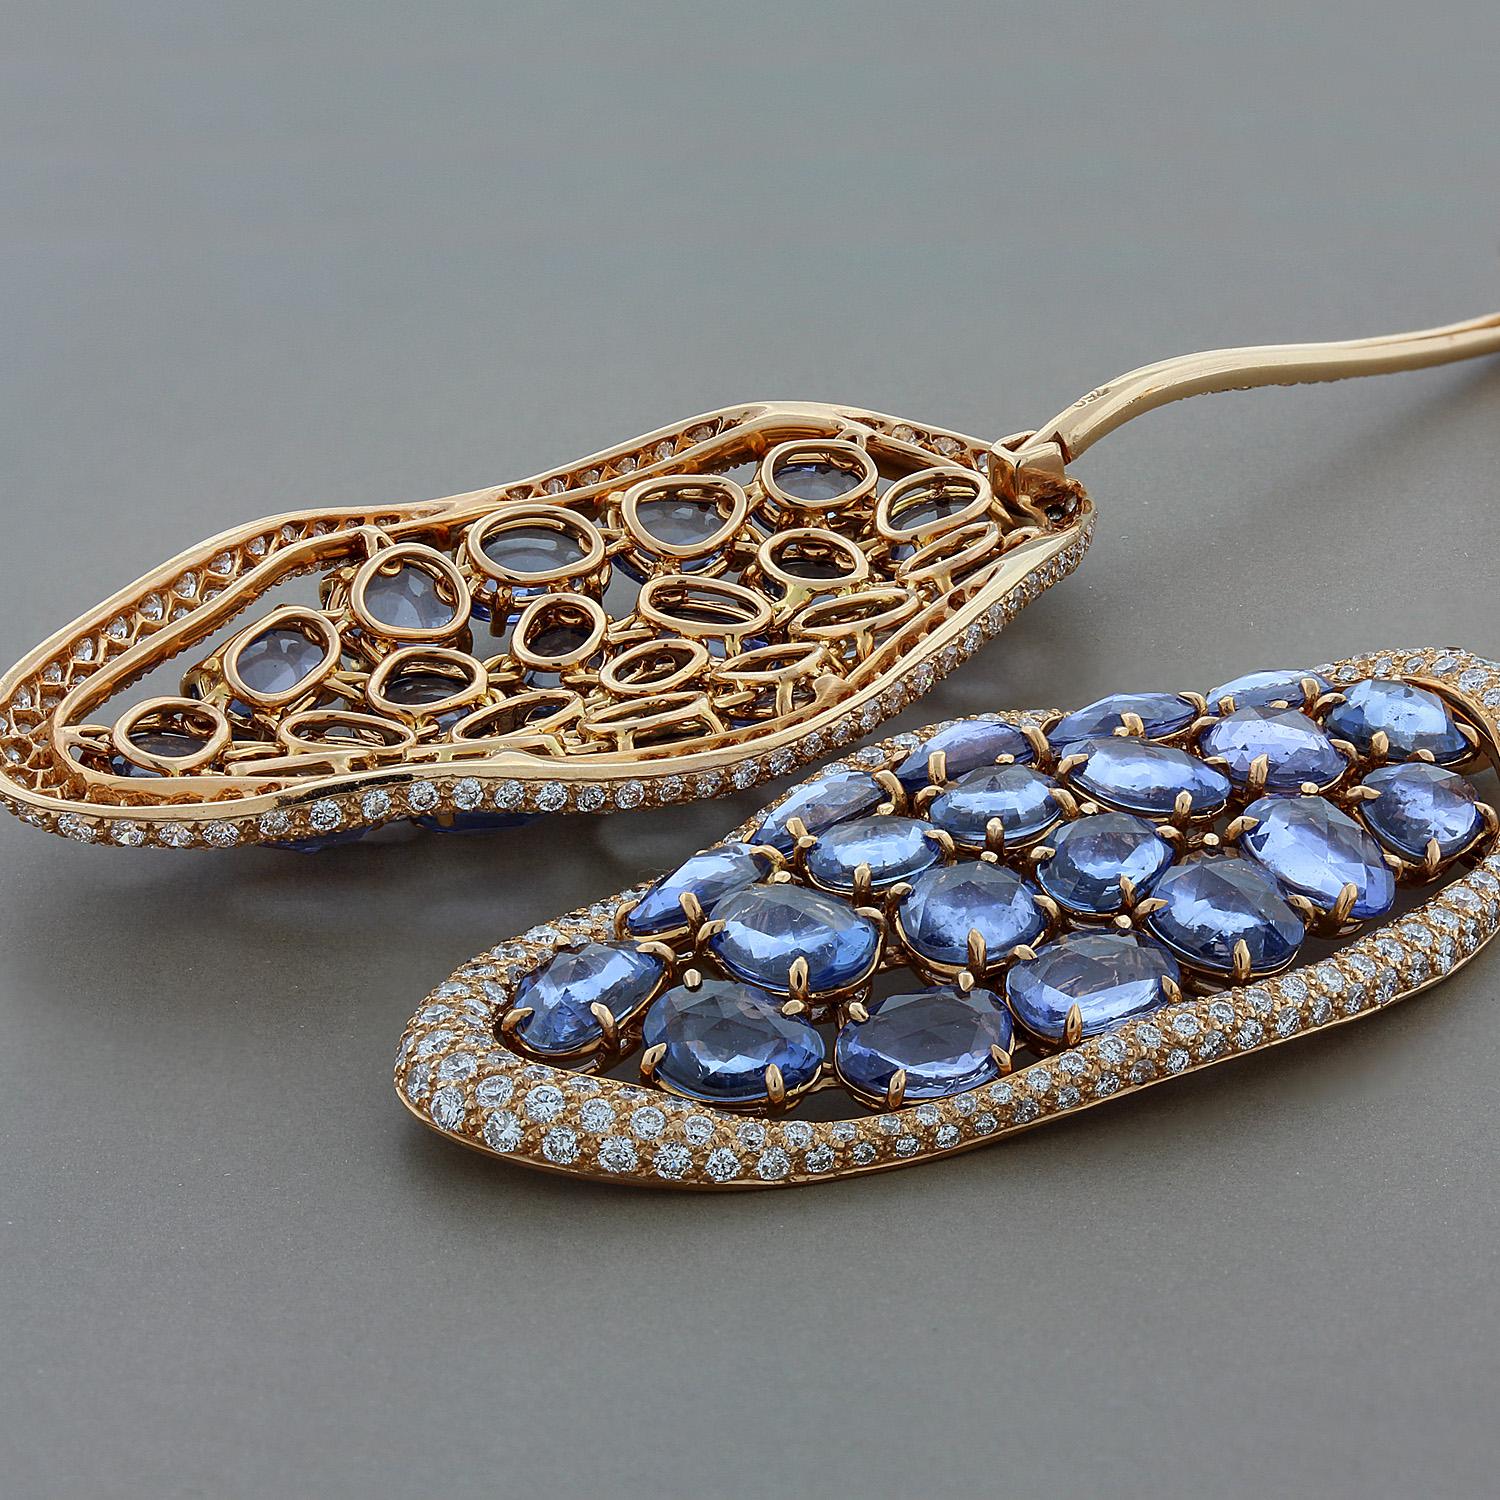 A spectacular styled and crafted pair of designer earrings. They feature 19.71 carats of rose cut blue sapphire which are prong set in 18K rose gold. There are 3.42 carats of round cut white diamond that are set around the blue sapphire and along